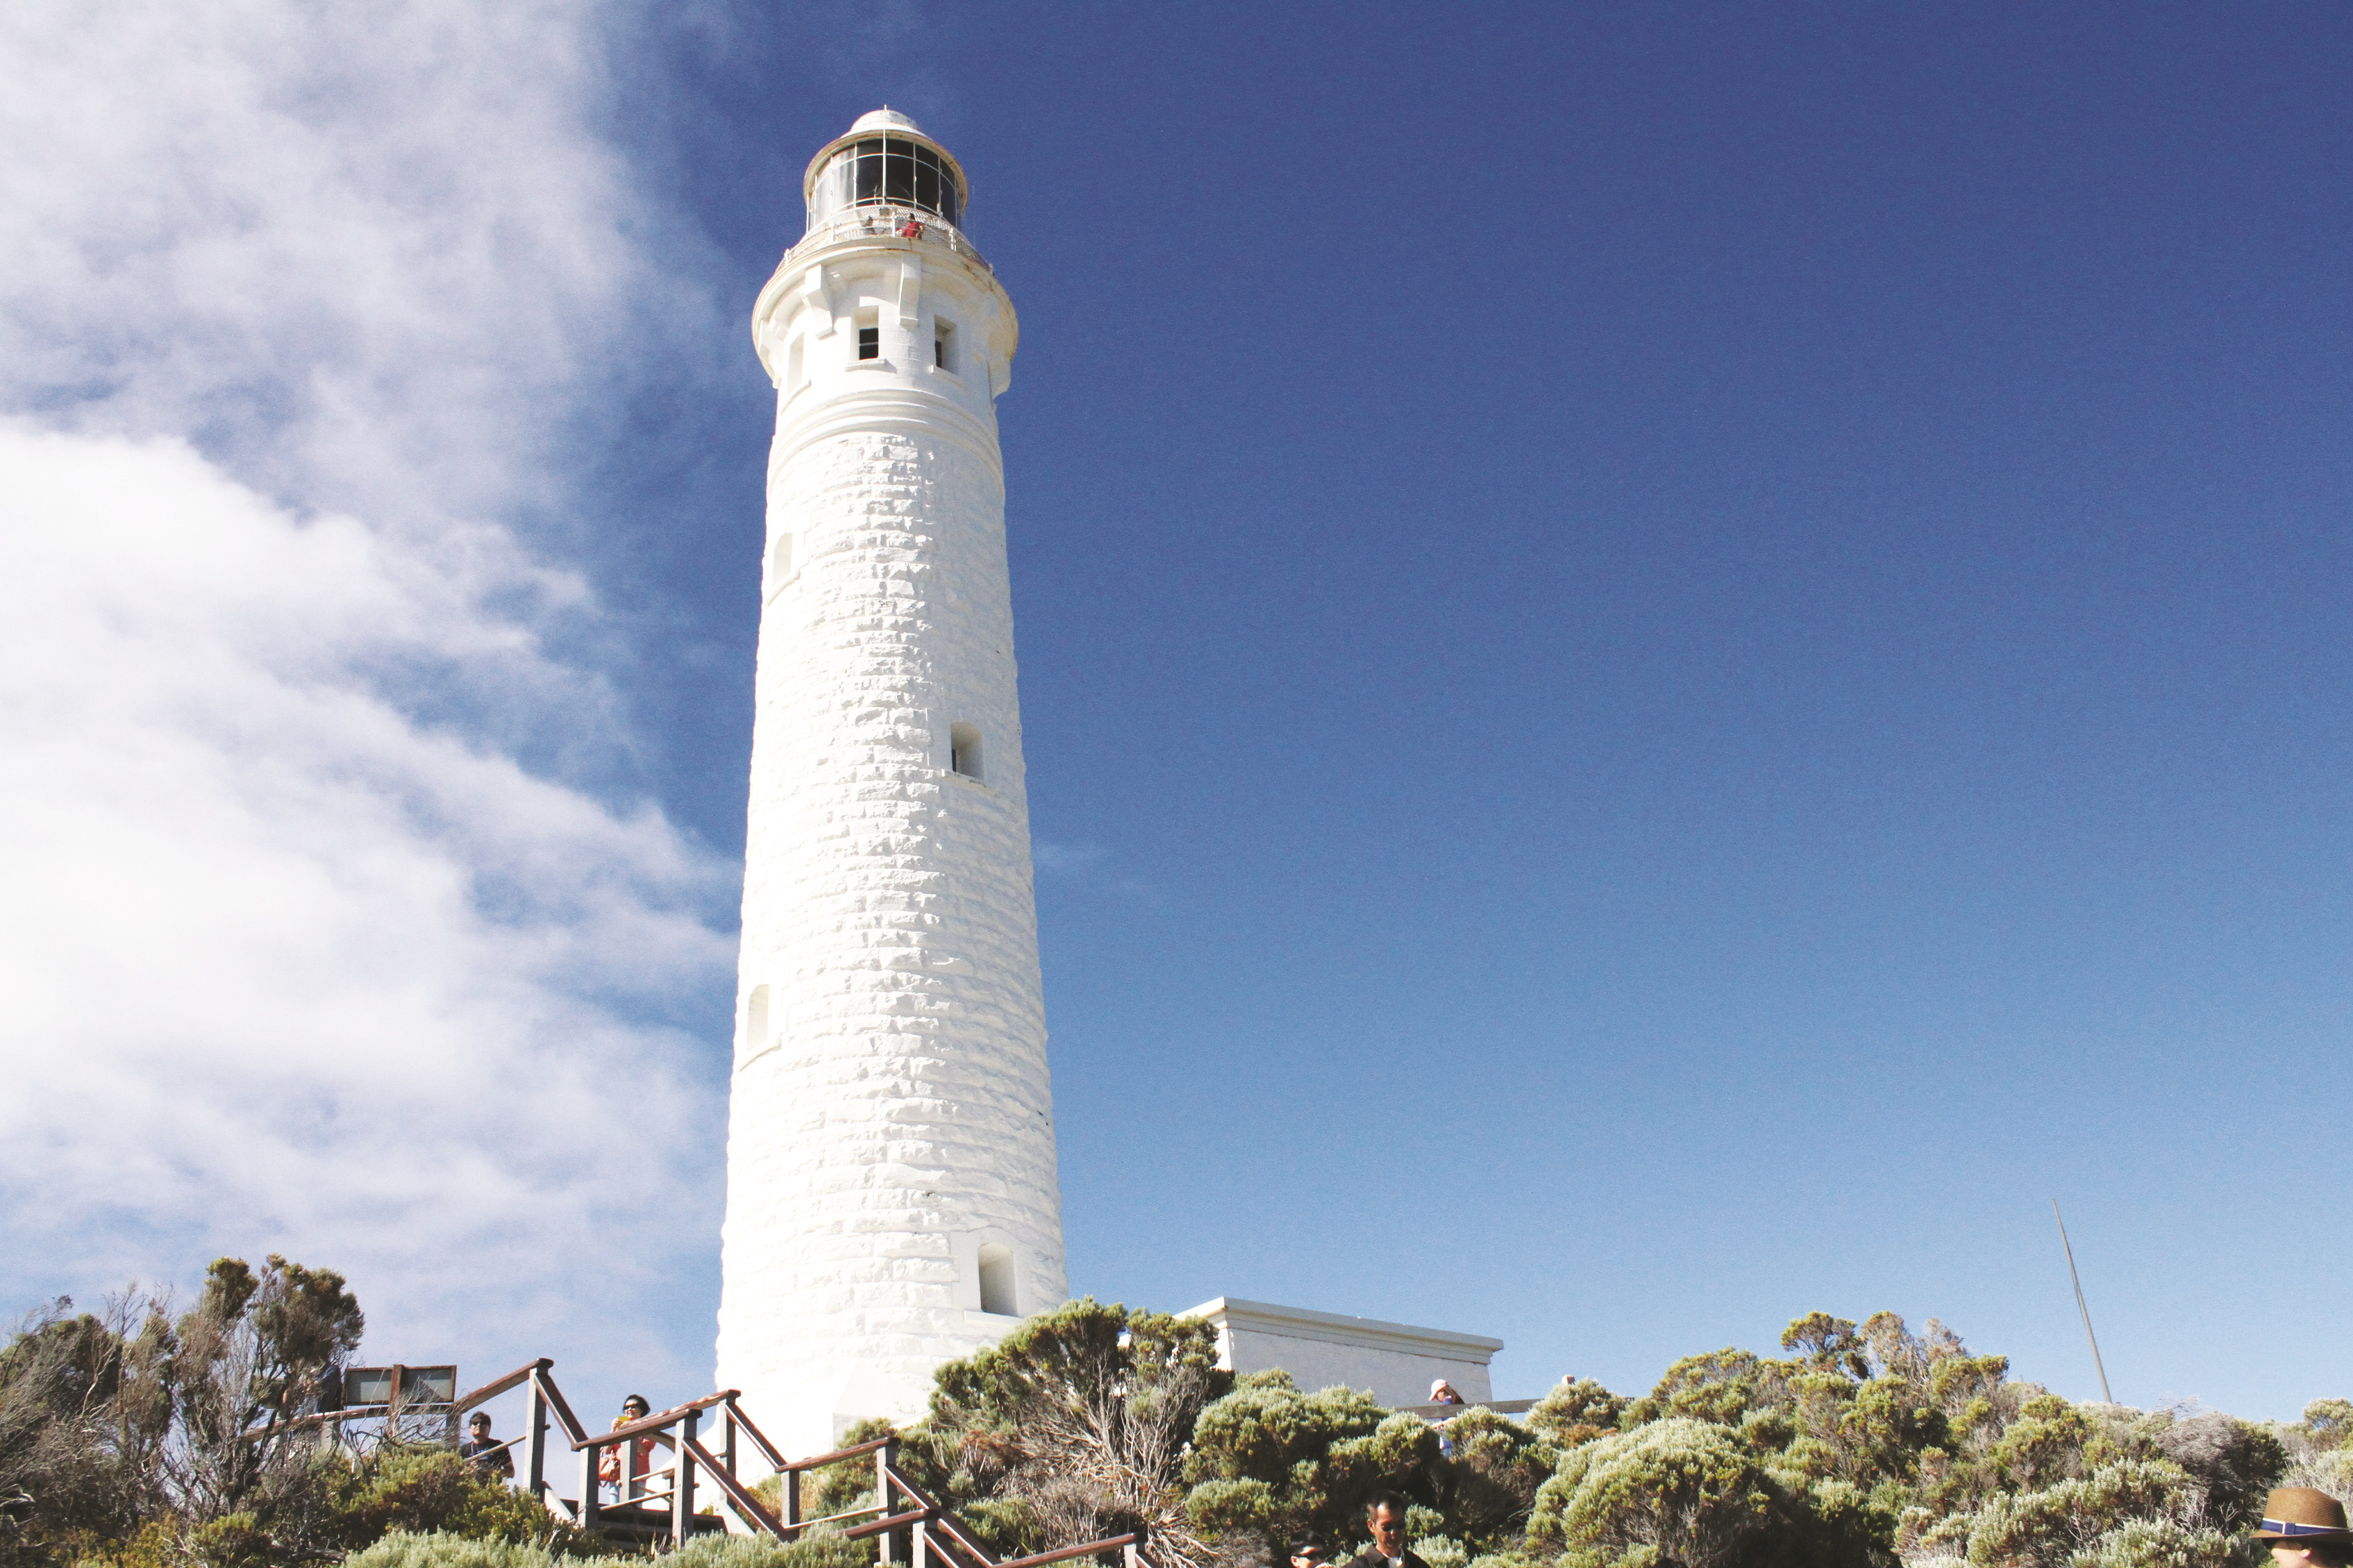 1-Day Tour from Perth: Margaret River + Busselton Jetty + Cape Leeuwin Lighthouse